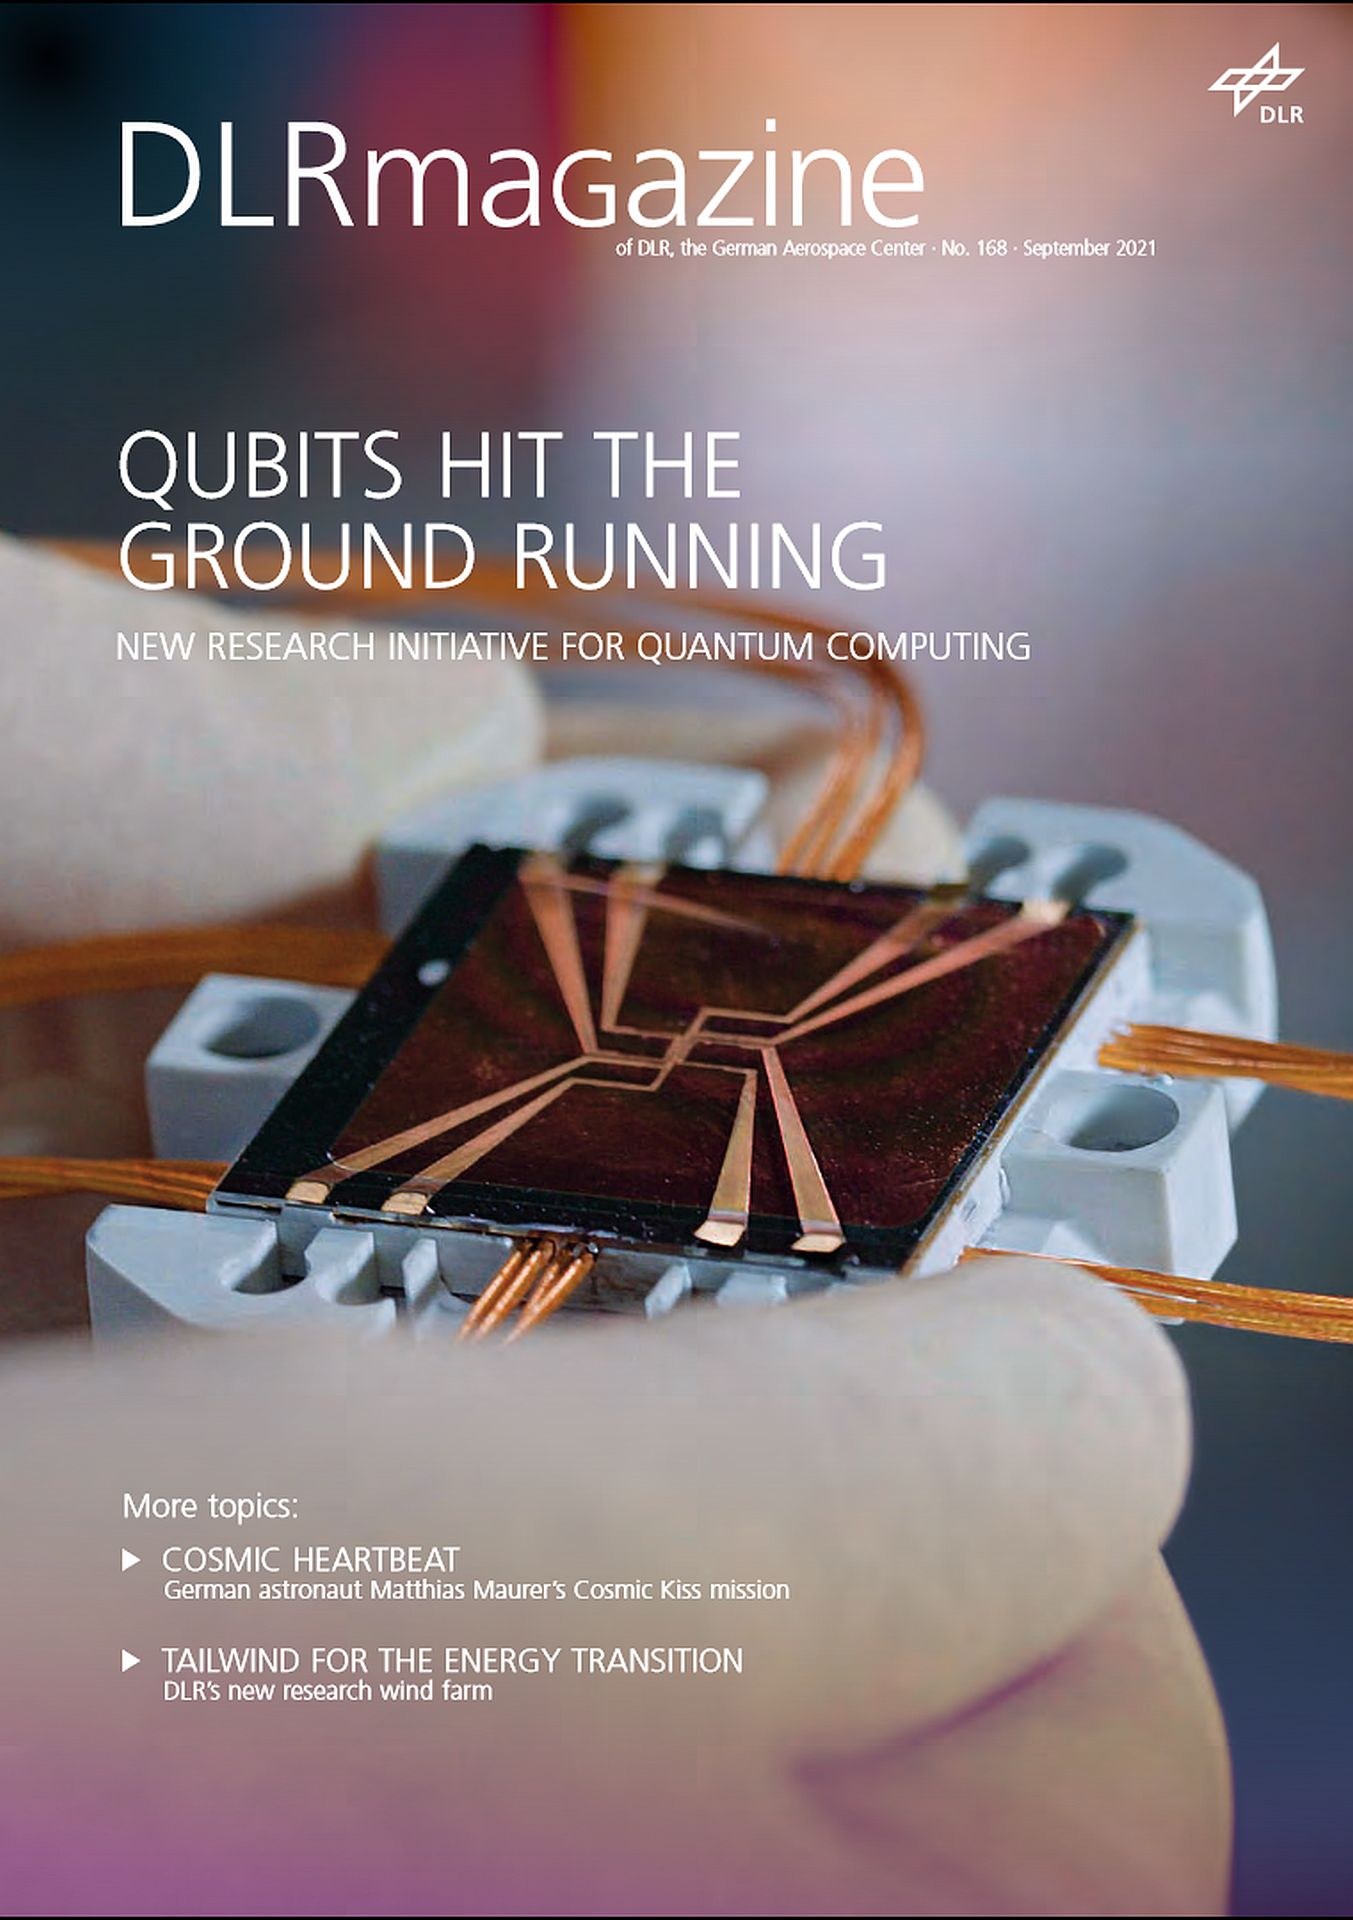 Preview image - DLRmagazine 168 – Qubits hit the ground running